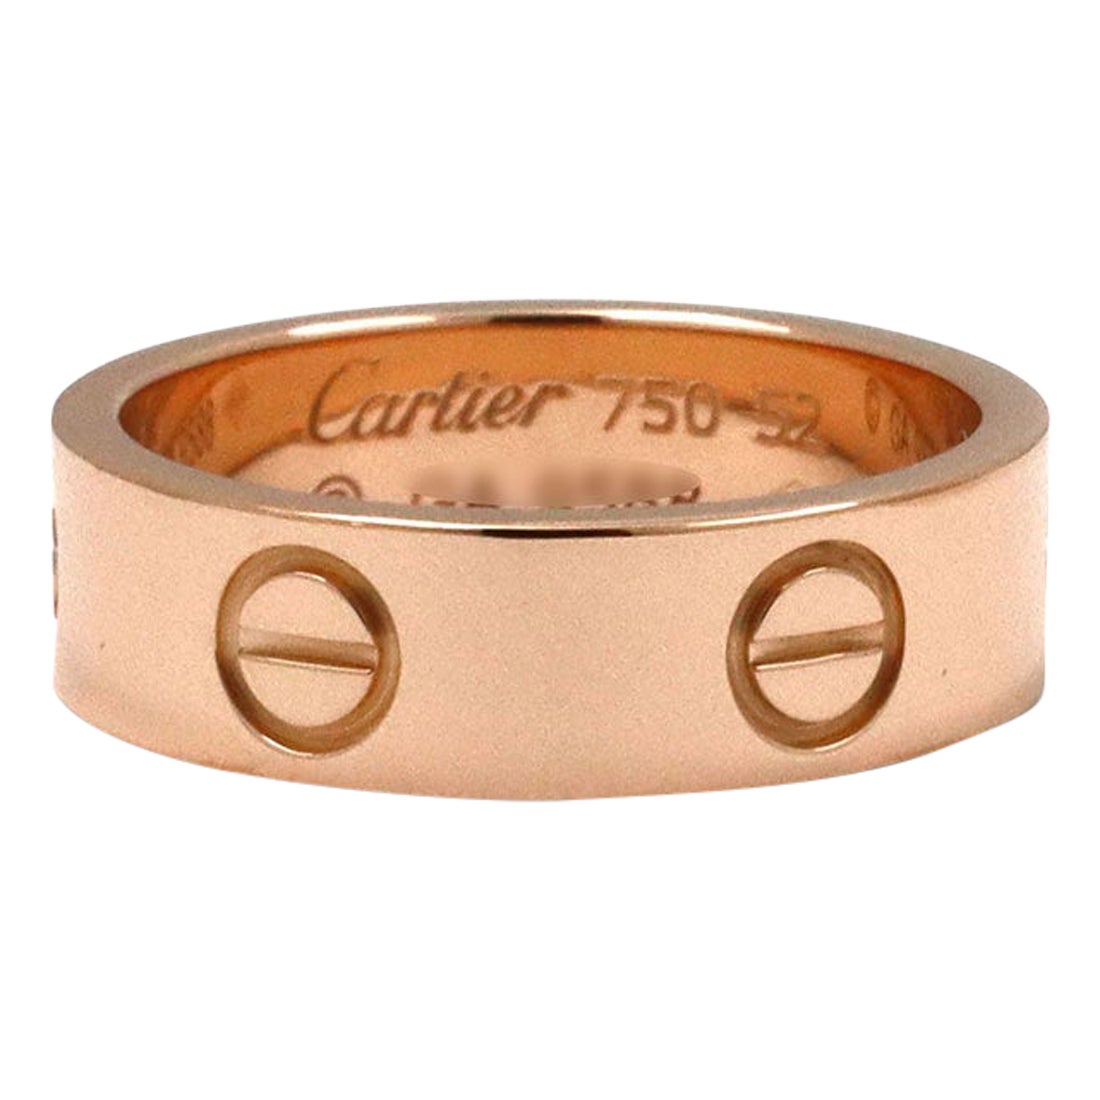 Cartier 'Love' Rose Gold Ring